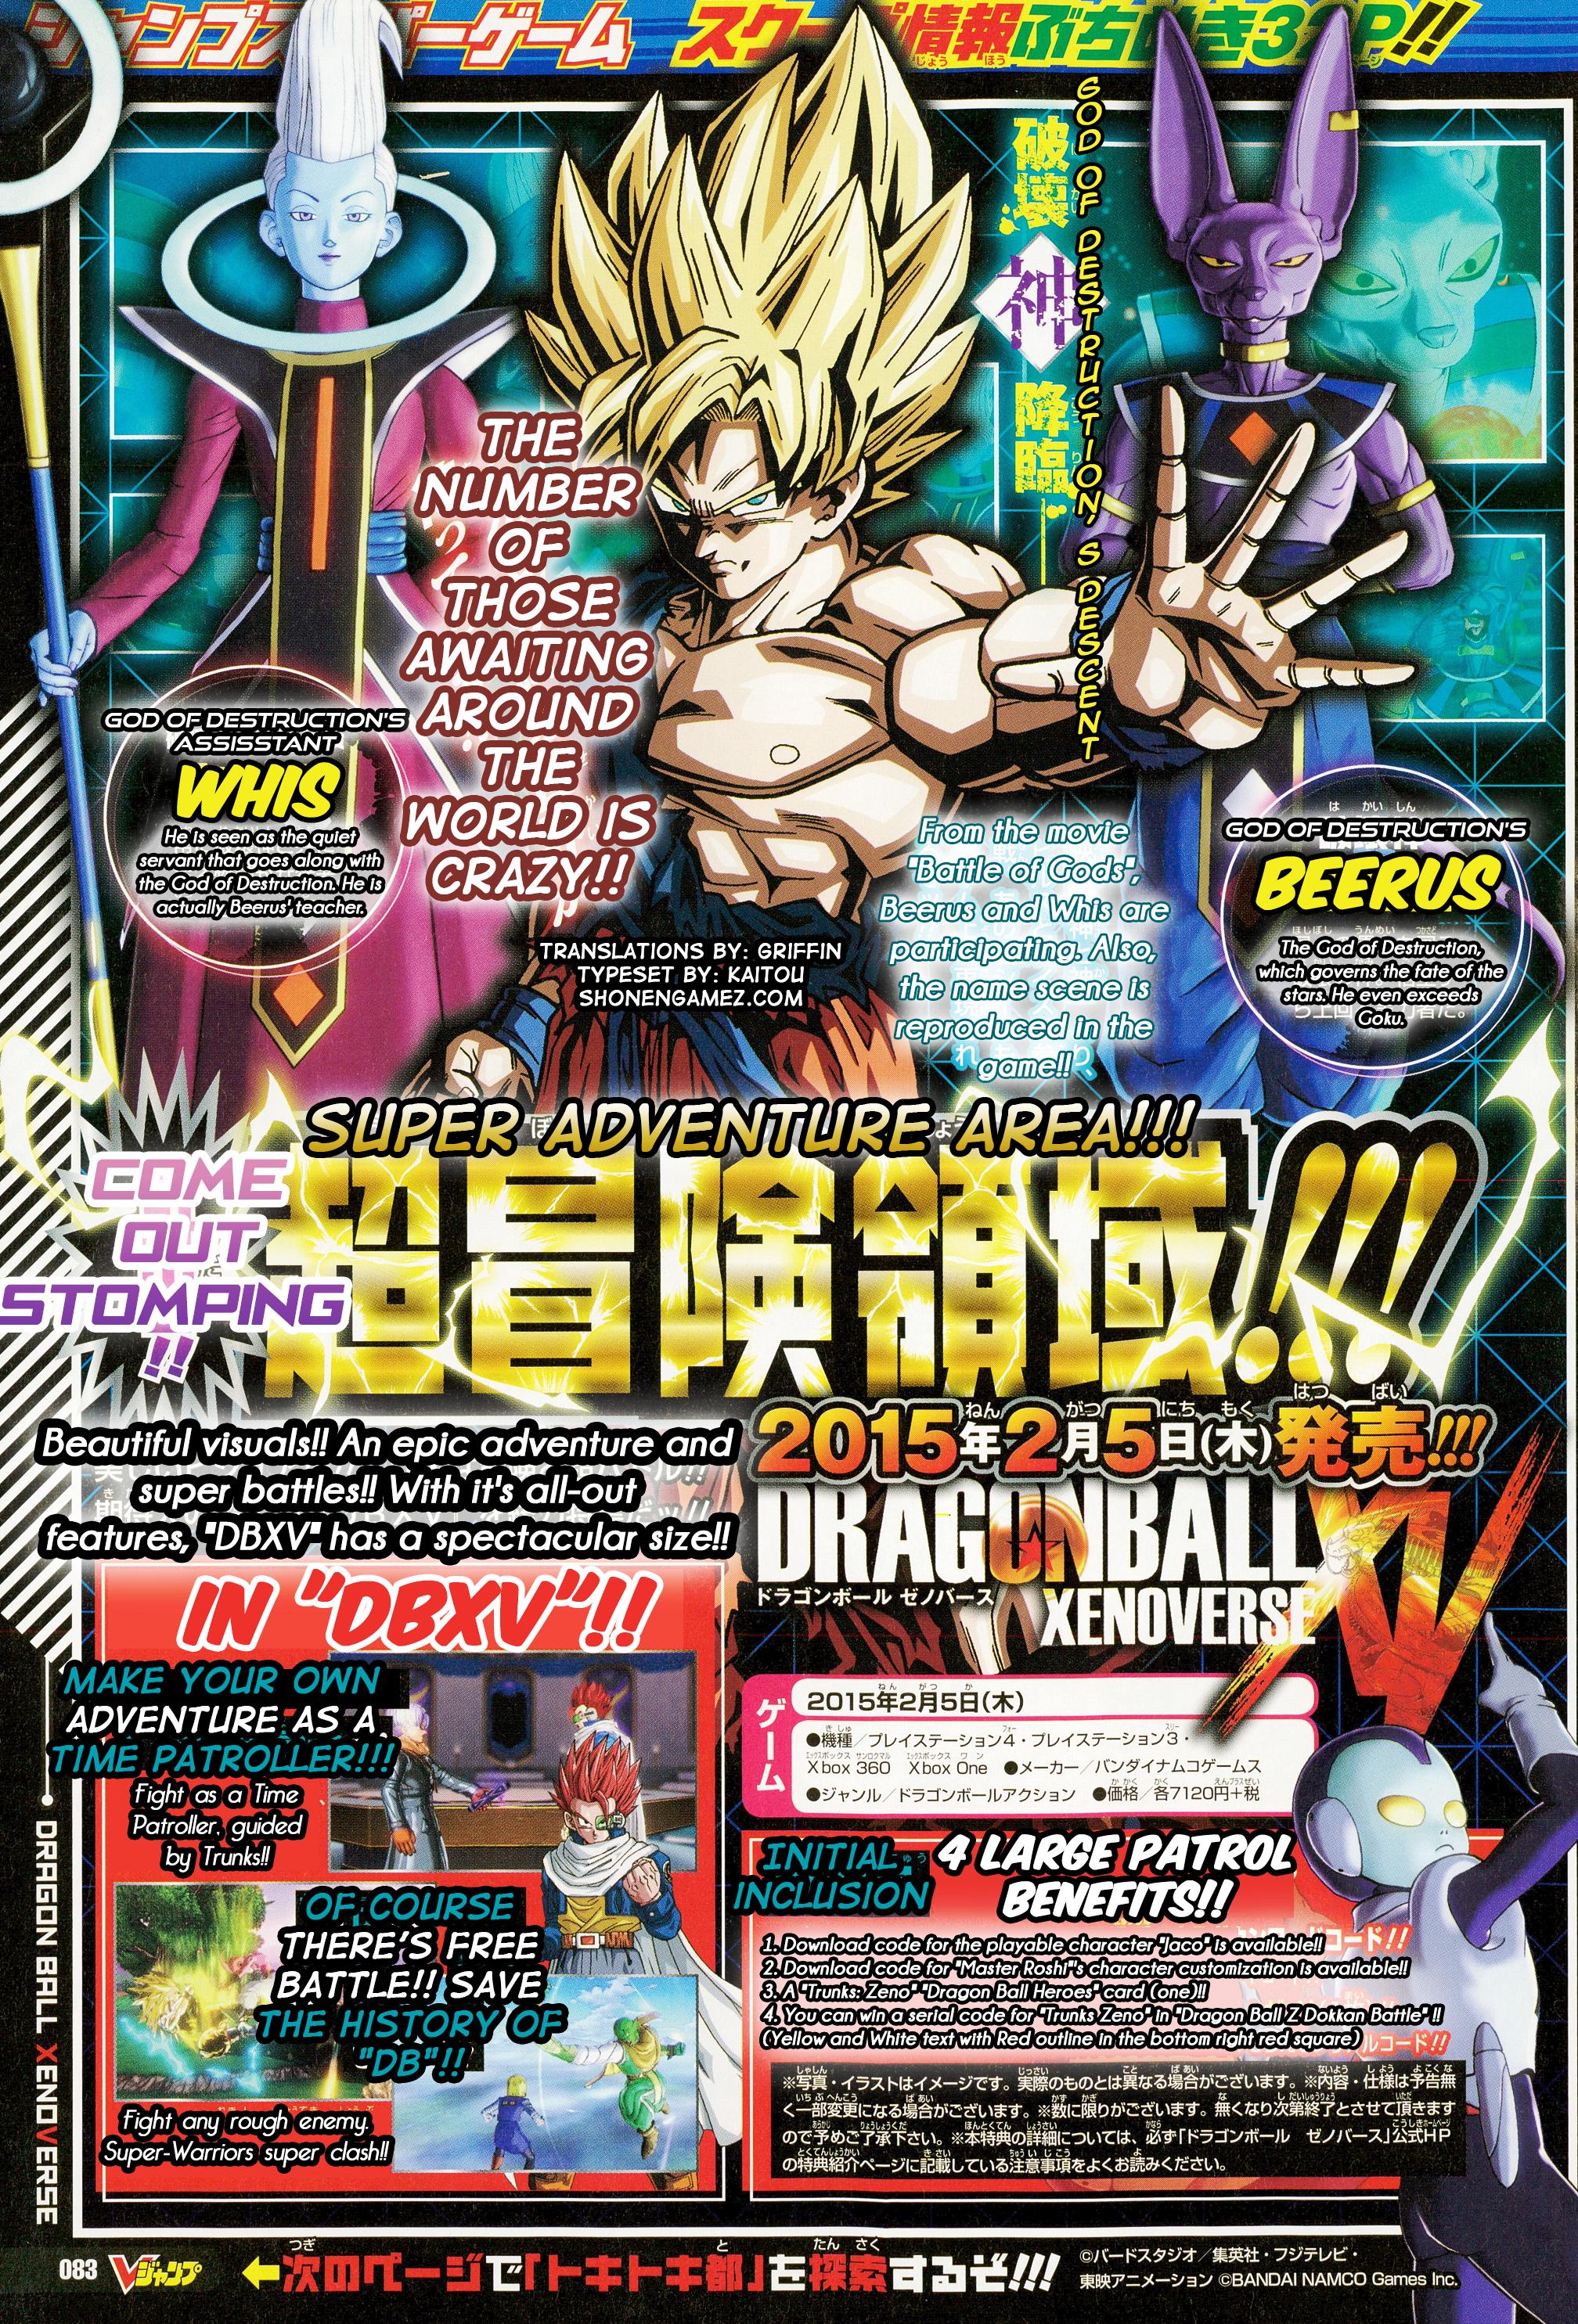 Giant Characters, Battle of Gods and More In Dragon Ball